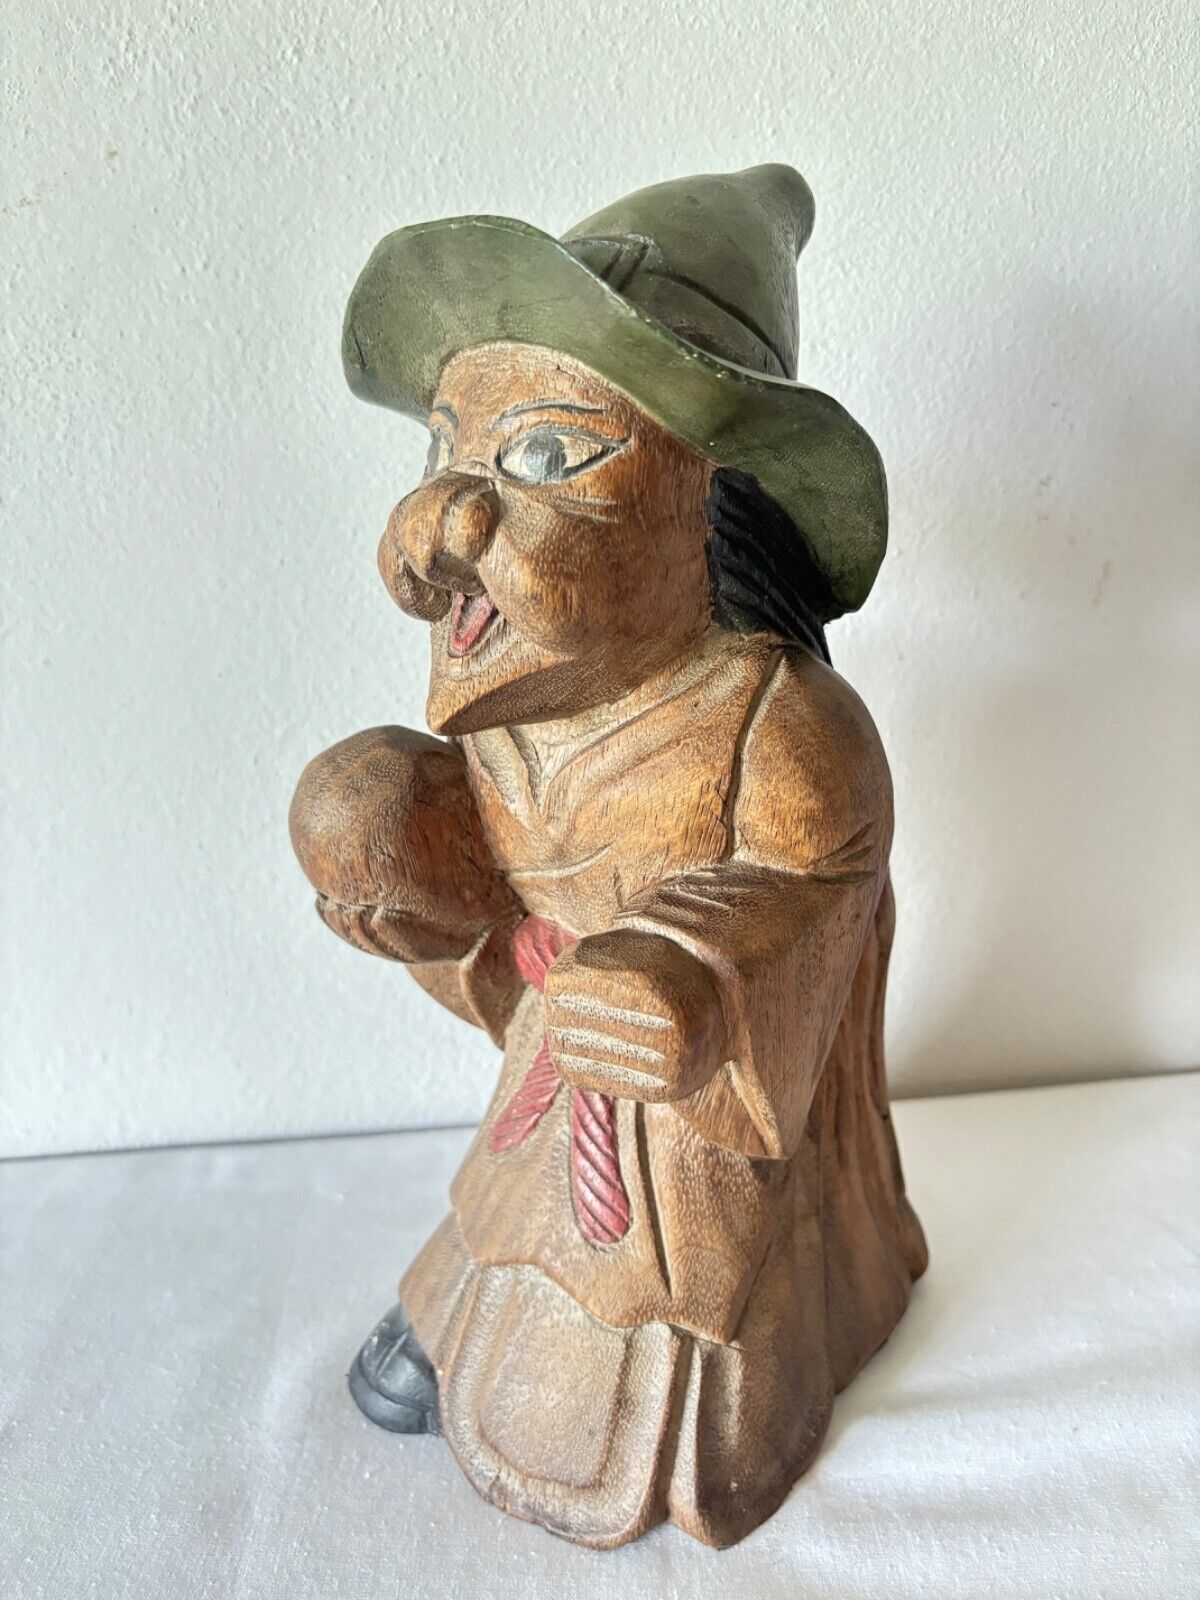 Vintage hand made wood carved Witch figure